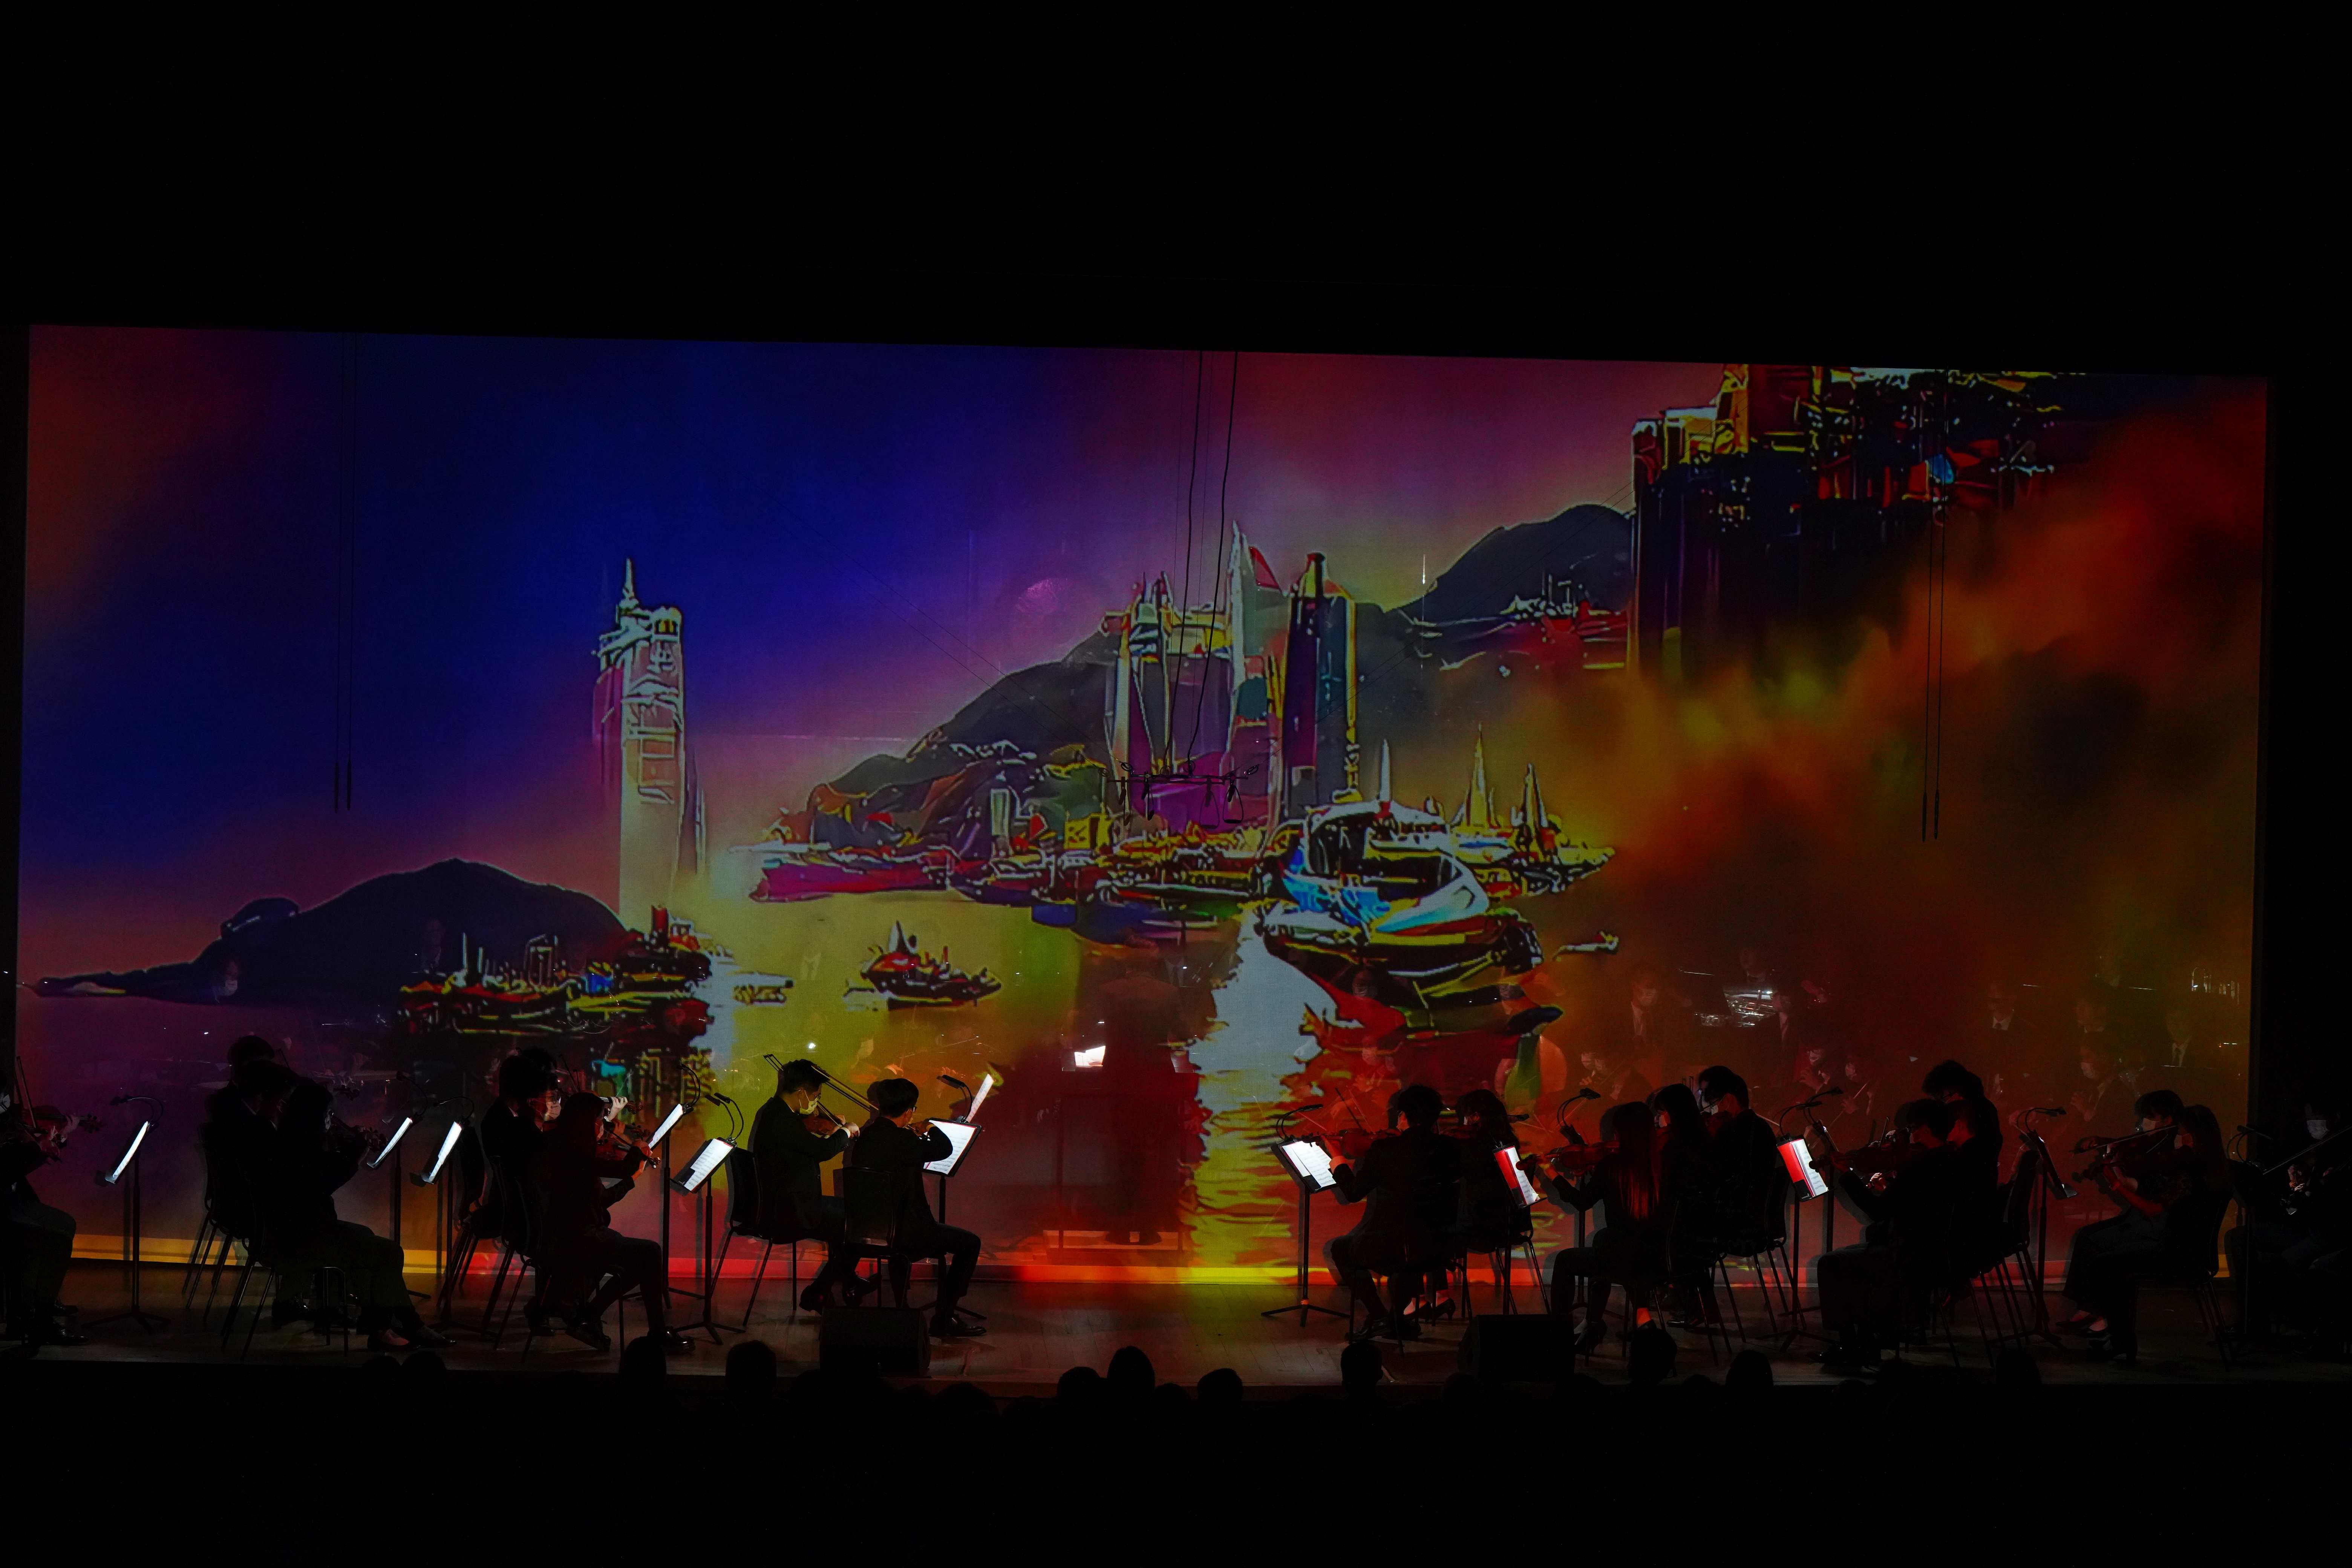 The HKBU Symphony Orchestra and an AI virtual choir perform a newly arranged choral-orchestral version of the song Pearl of the Orient, with an accompanying cross-media visual narrative based on the lyrics and music created by an AI media artist.